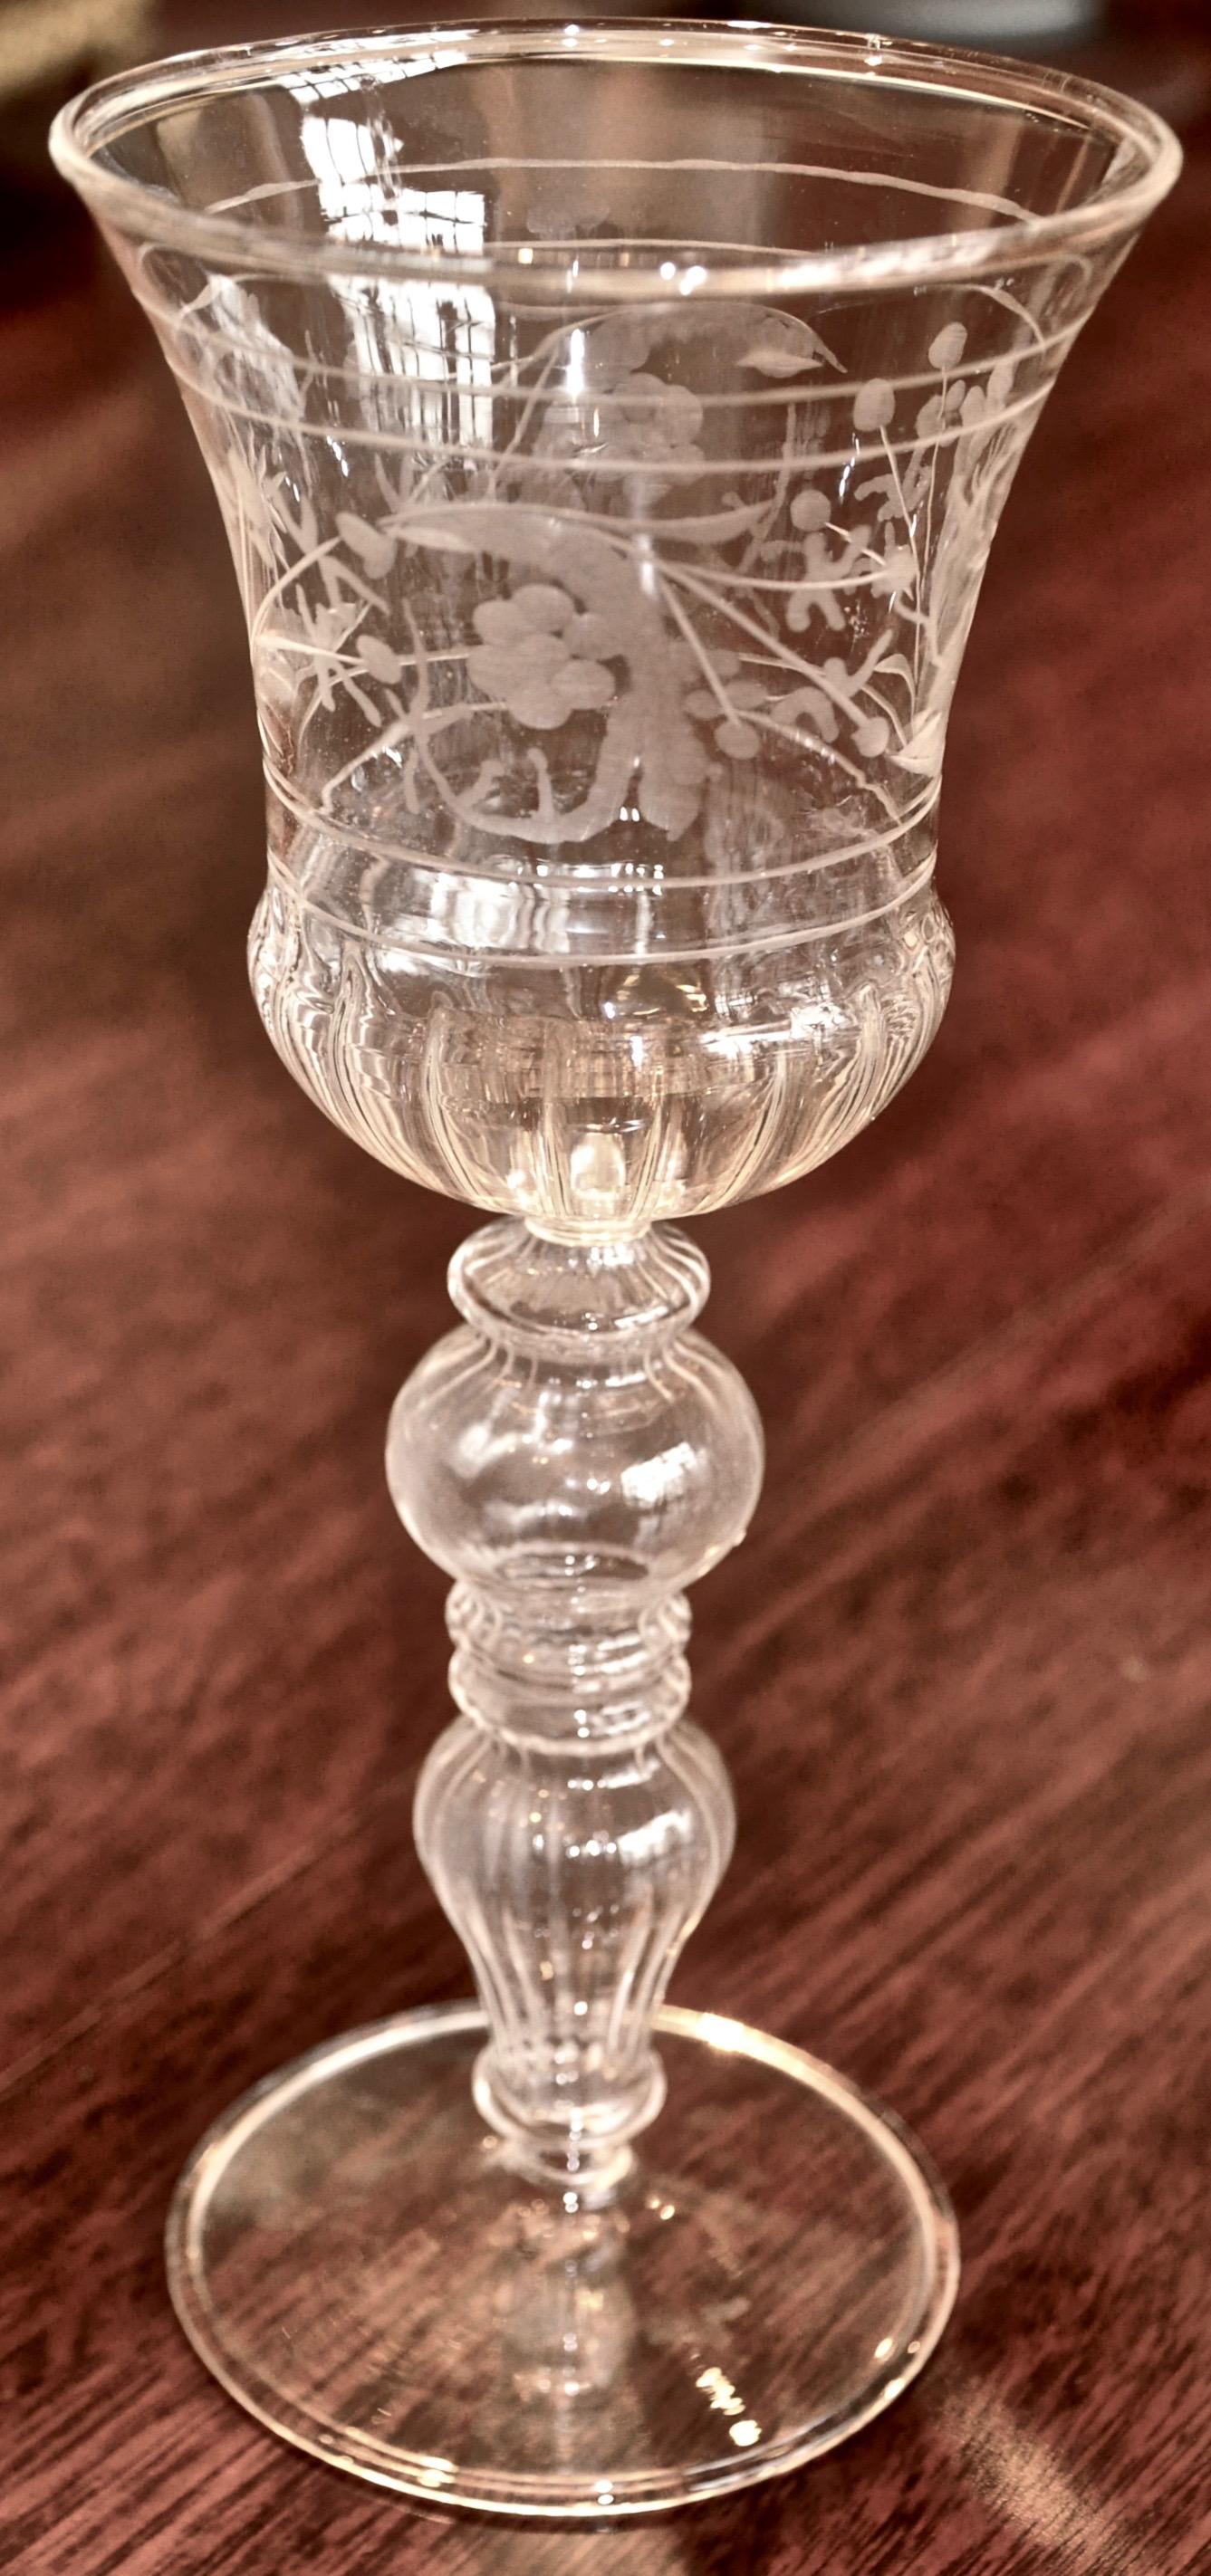 Fourteen Venetian glass wine goblets with floral etching. Hollow stem blown in Baroque manner of the 18th century. Footed base. Ribbed bowl. All in excellent.

From a Malibu collection.